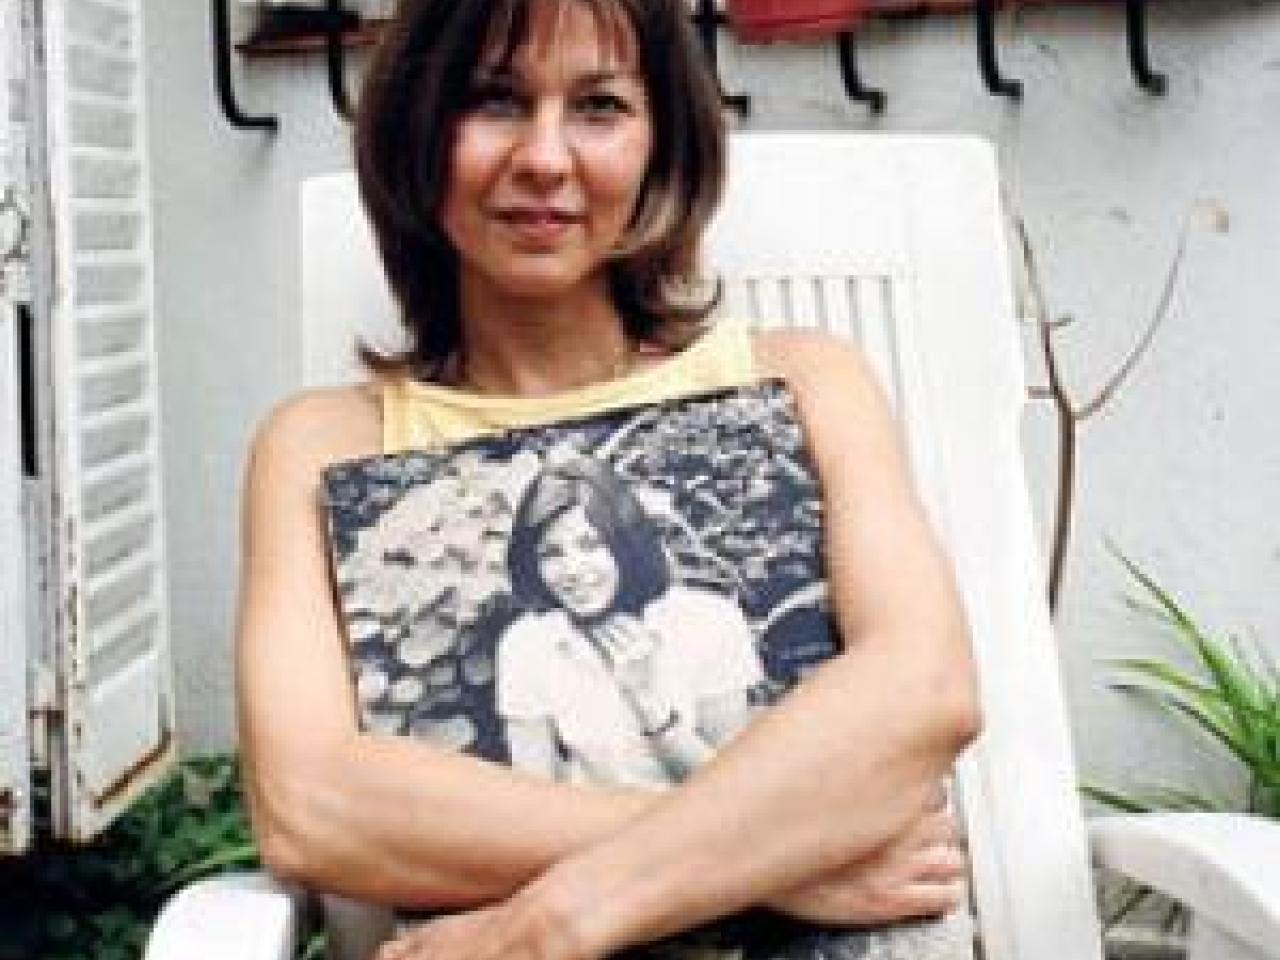 A woman in a sleeveless top sits outdoors on a white lawn chair. She is looking into the camera and her mouth is slightly open in a smile. A black and white image of a smiling young woman rests on her lap, her arms encircling the photograph. In the background are several potted plants and a white window shutter.